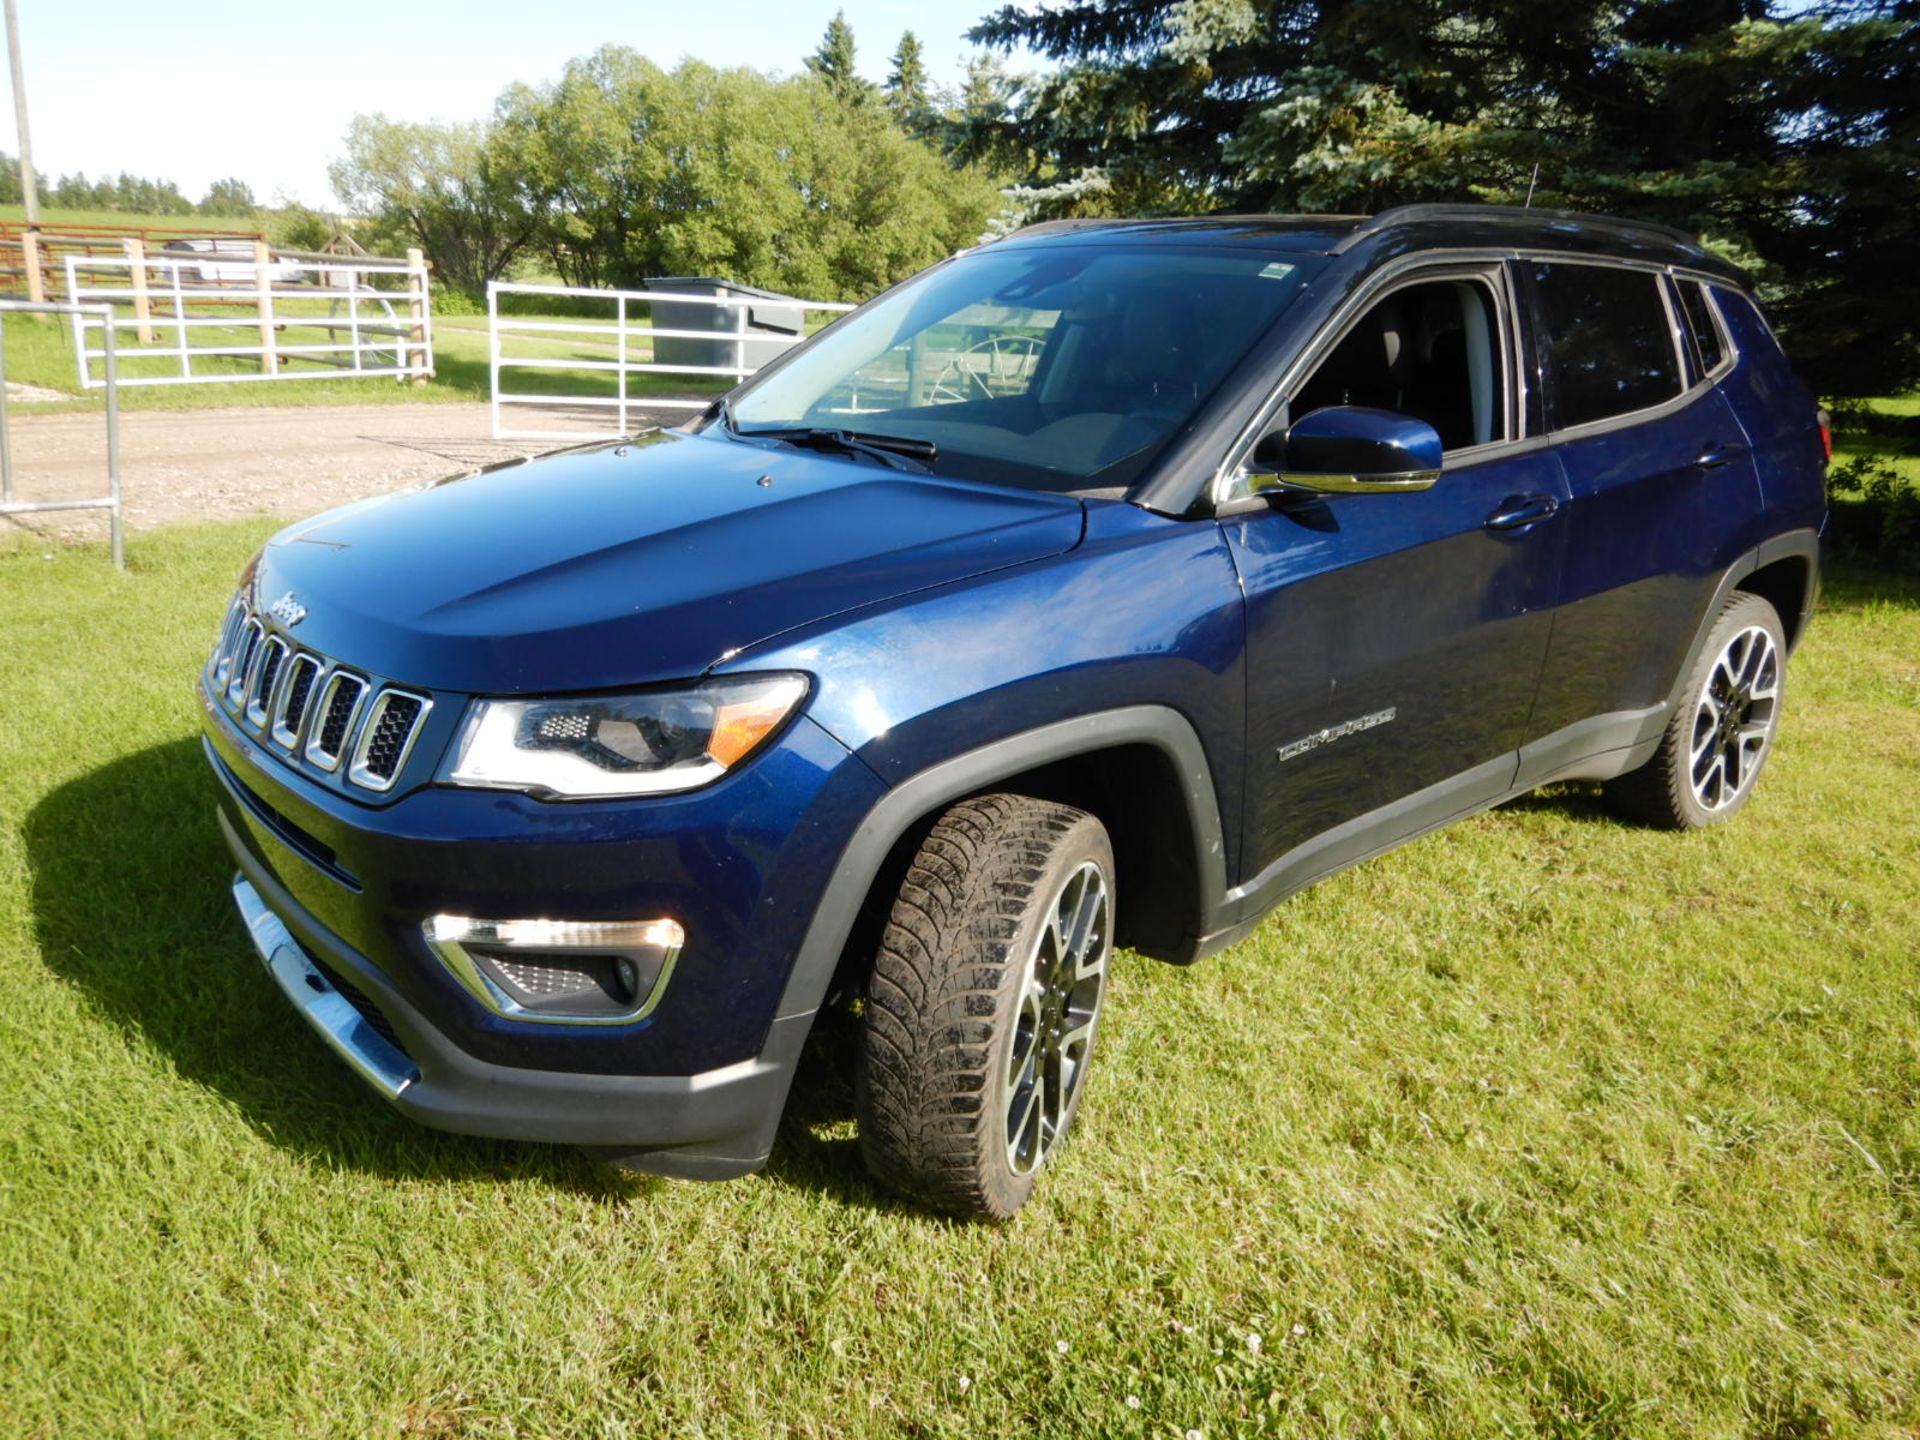 2018 JEEP COMPASS LTD. 4 WD, SPORT UTILITY SUV 4 DR, 37986 KM SHOWING